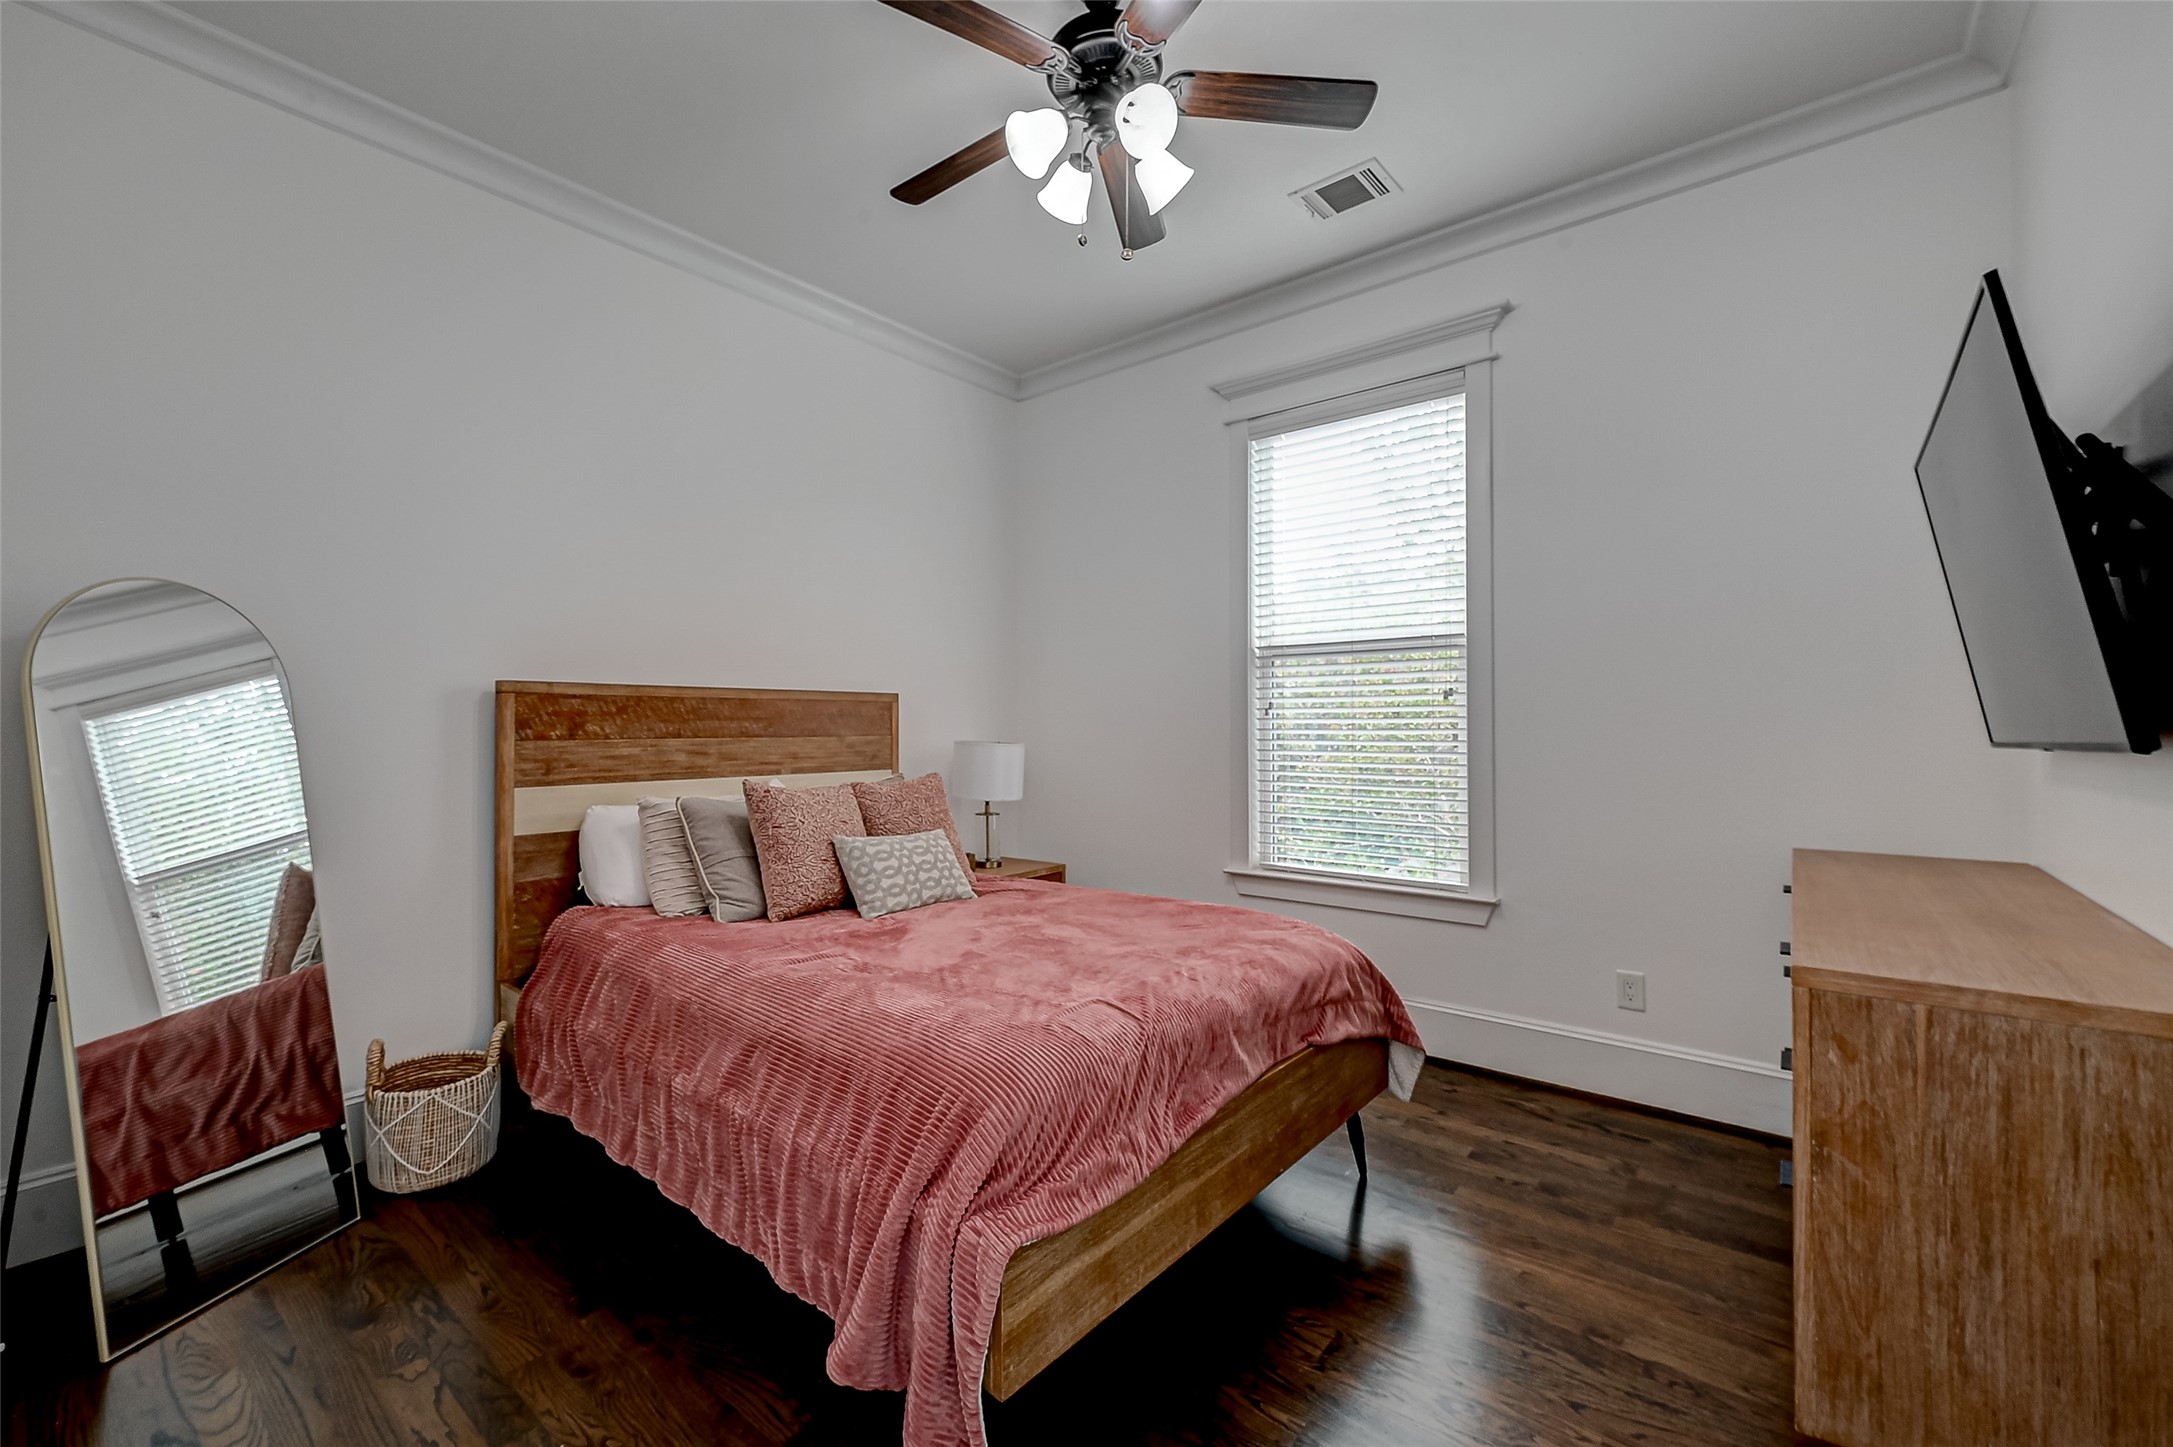 The secondary bedroom is a cozy haven, complete with a nice walk-in closet that ensures both comfort and organization for its lucky inhabitant.